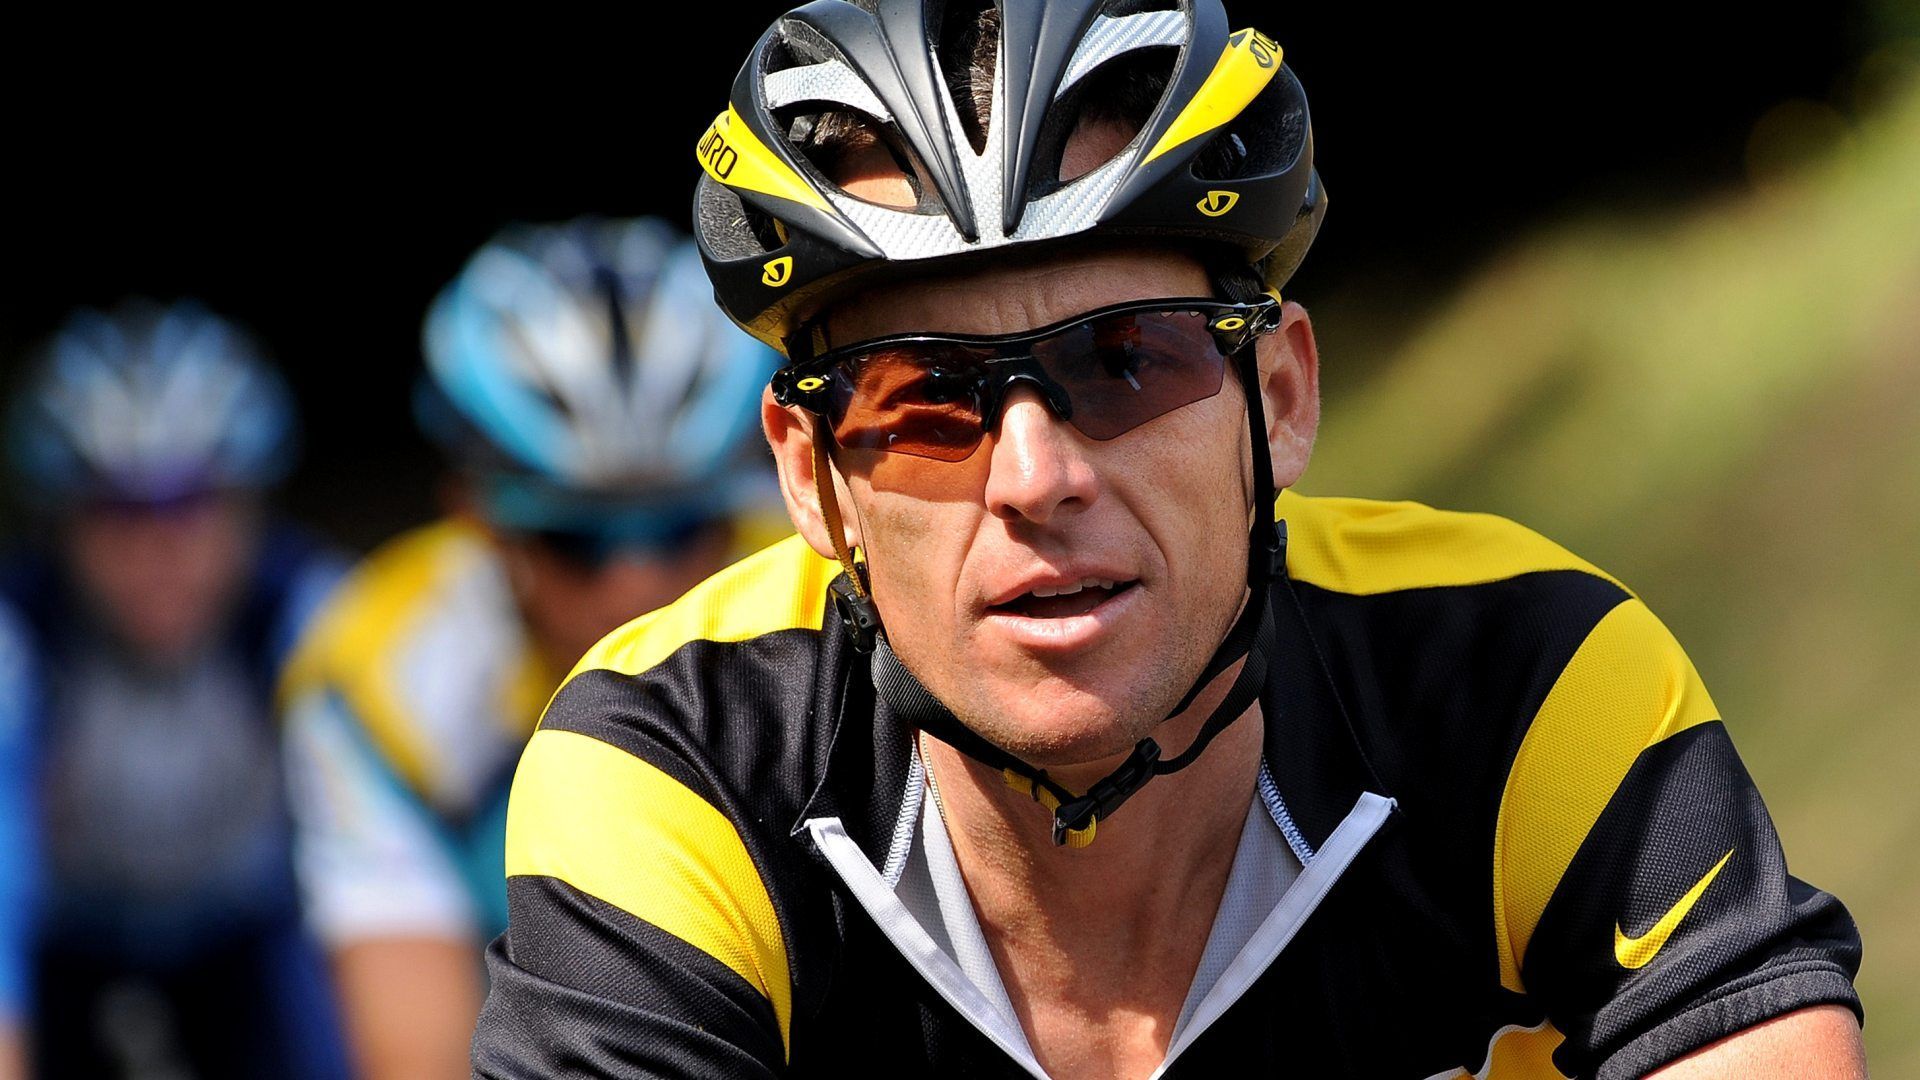 Lance Armstrong HD Wallpaper From